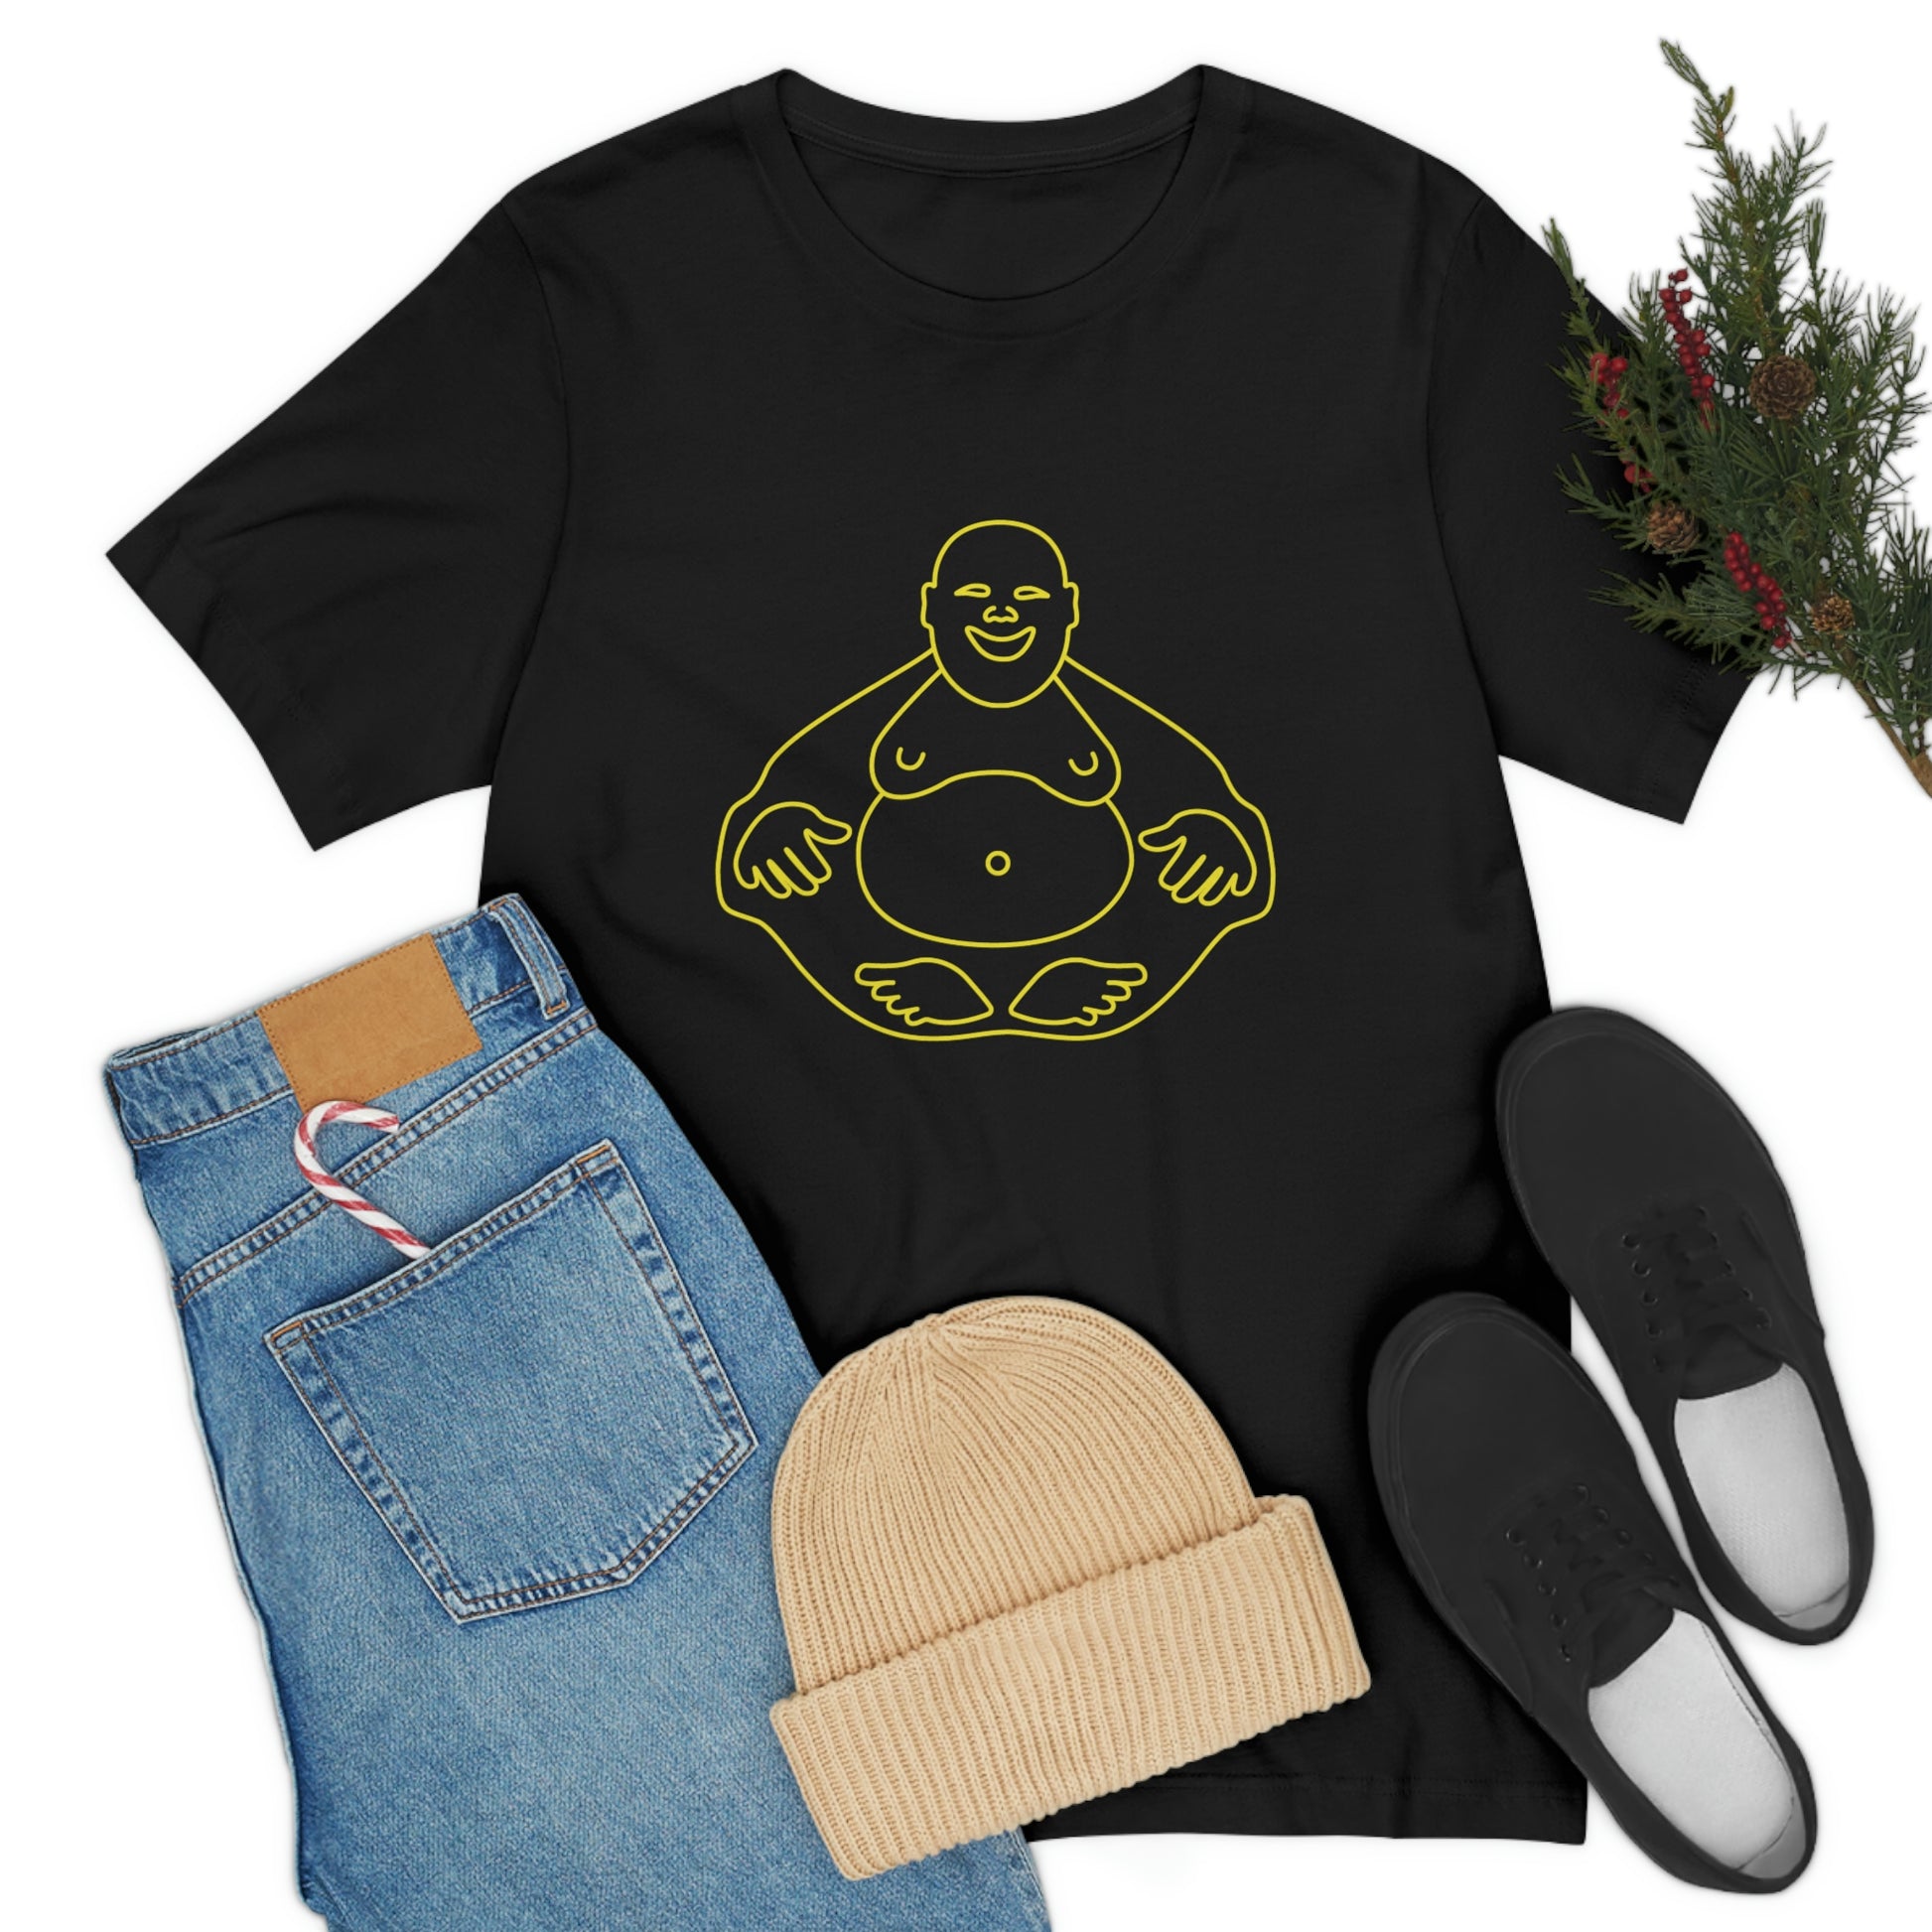 Black T-Shirt featuring a yellow 'Laughing Buddha' design from the TEQNEON Ha Ha Land collection, exuding joy and humour